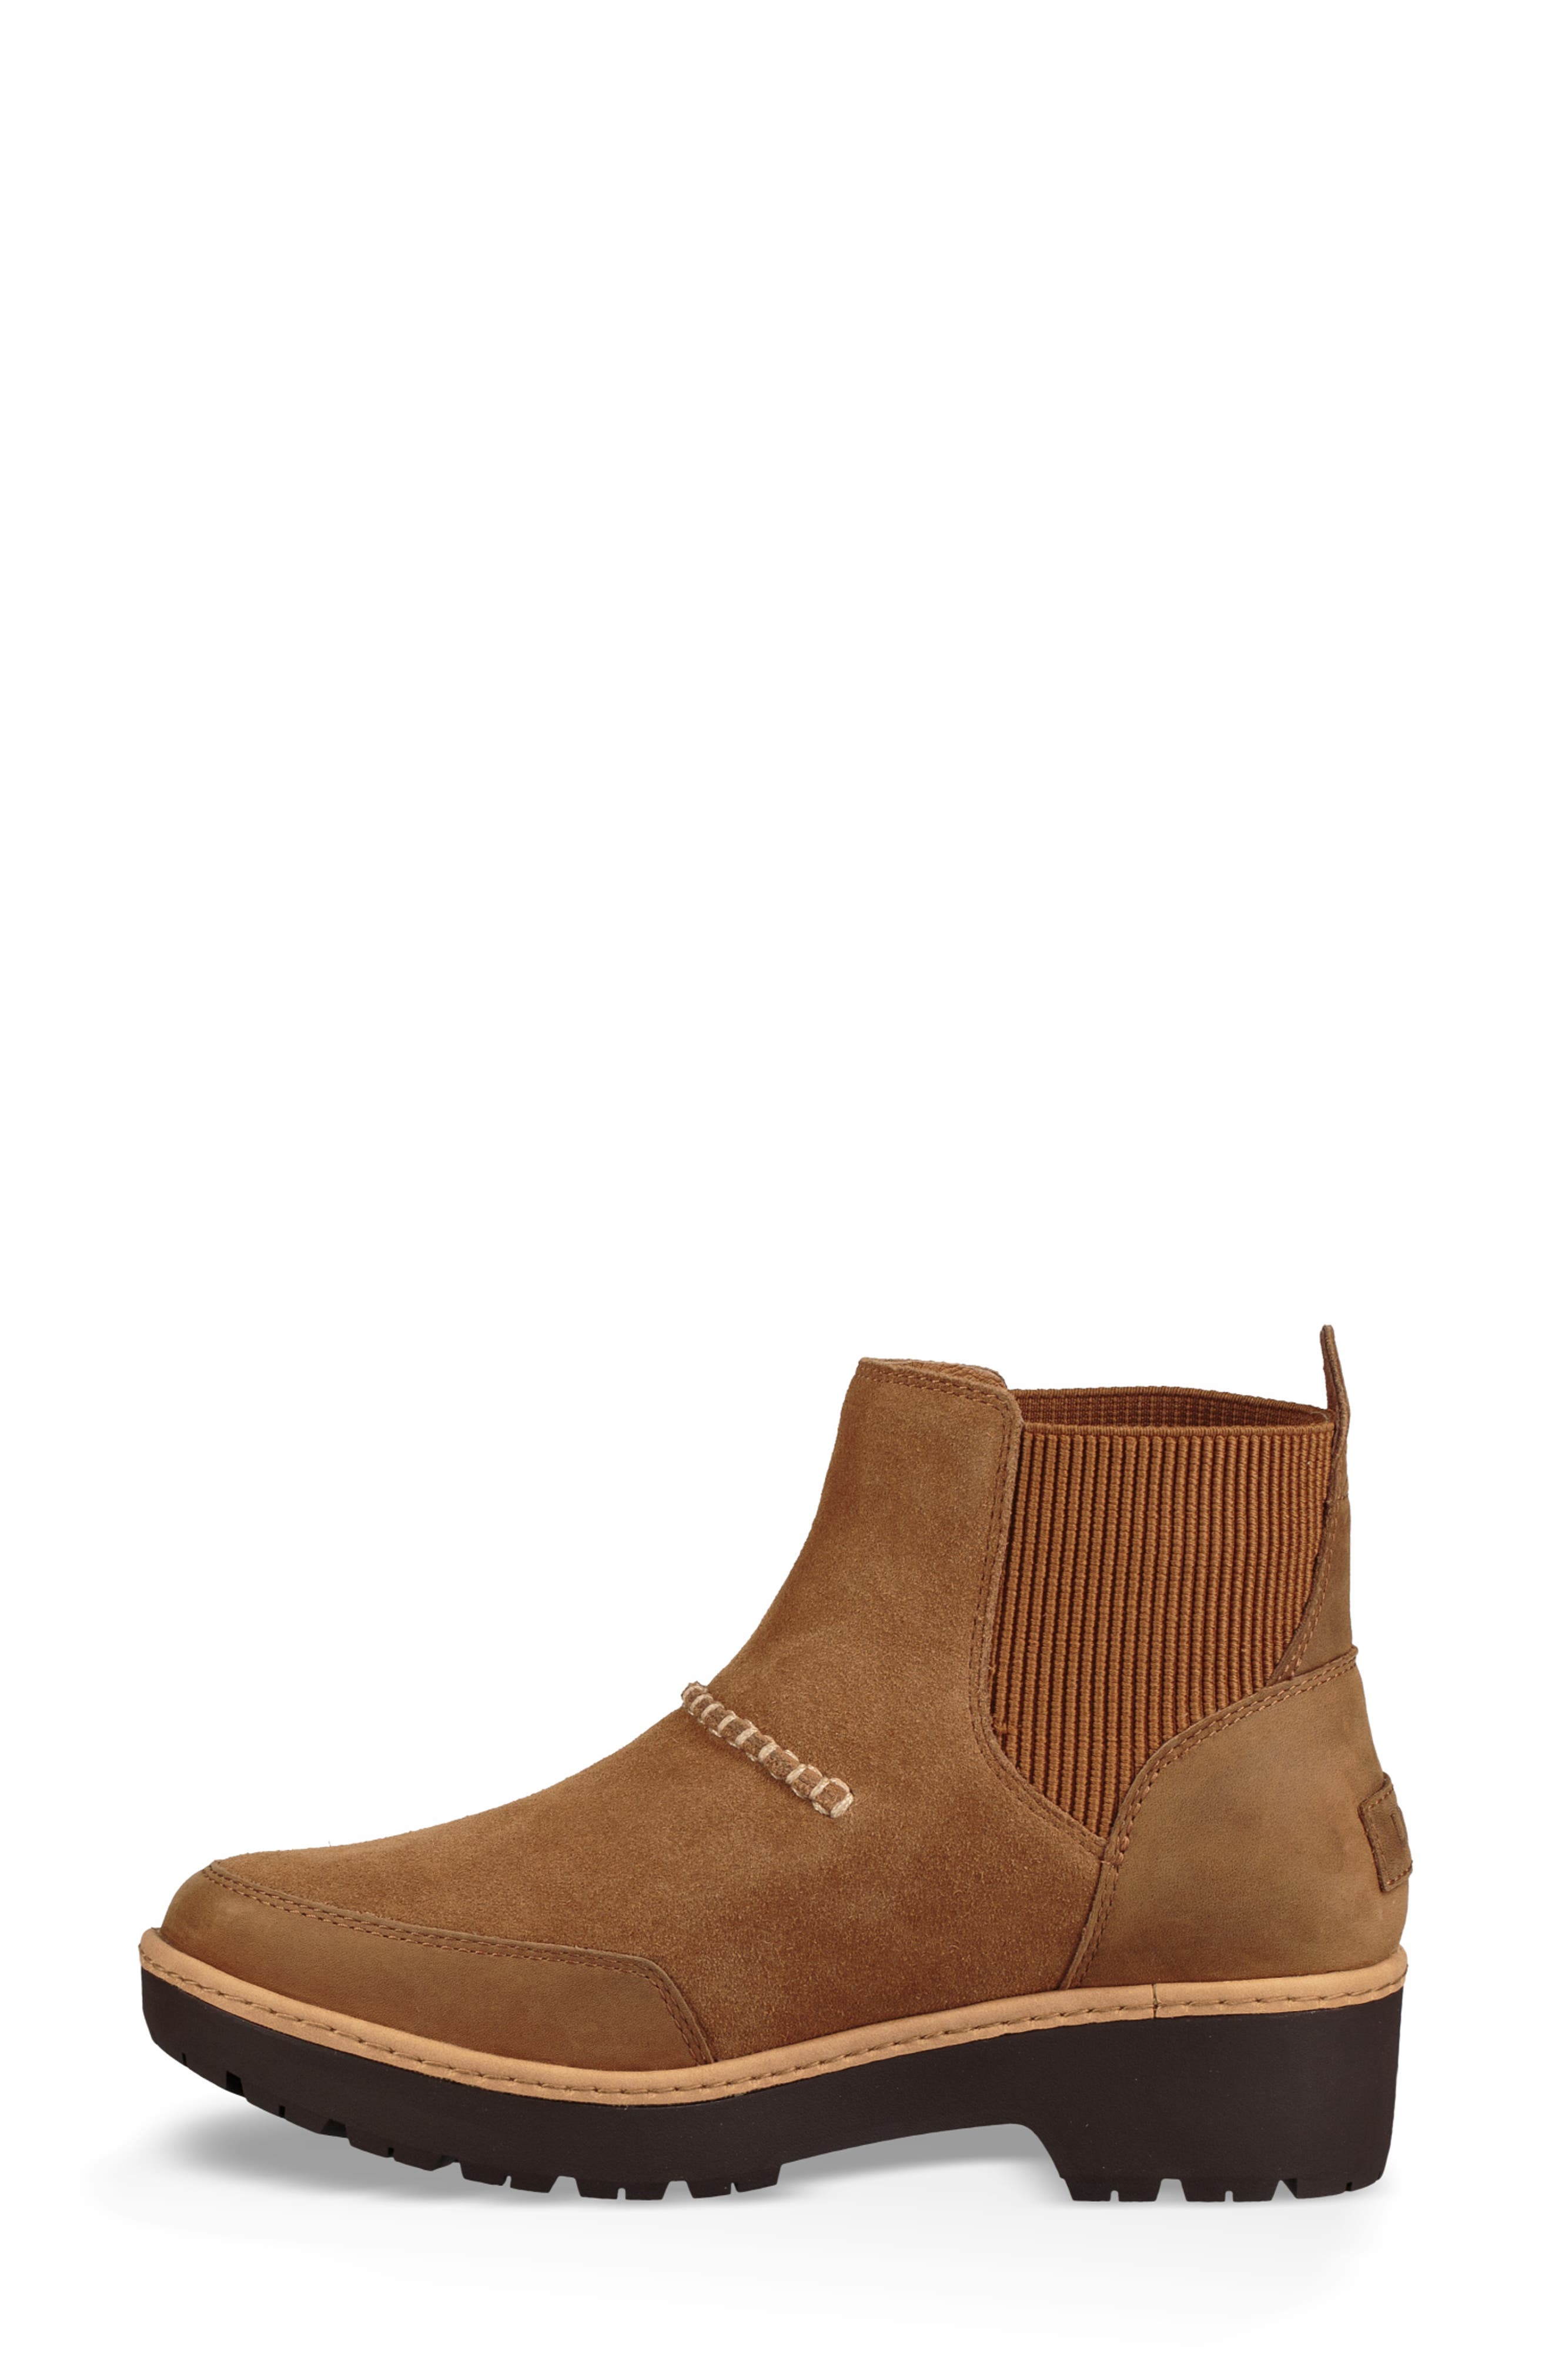 kress ankle boot ugg